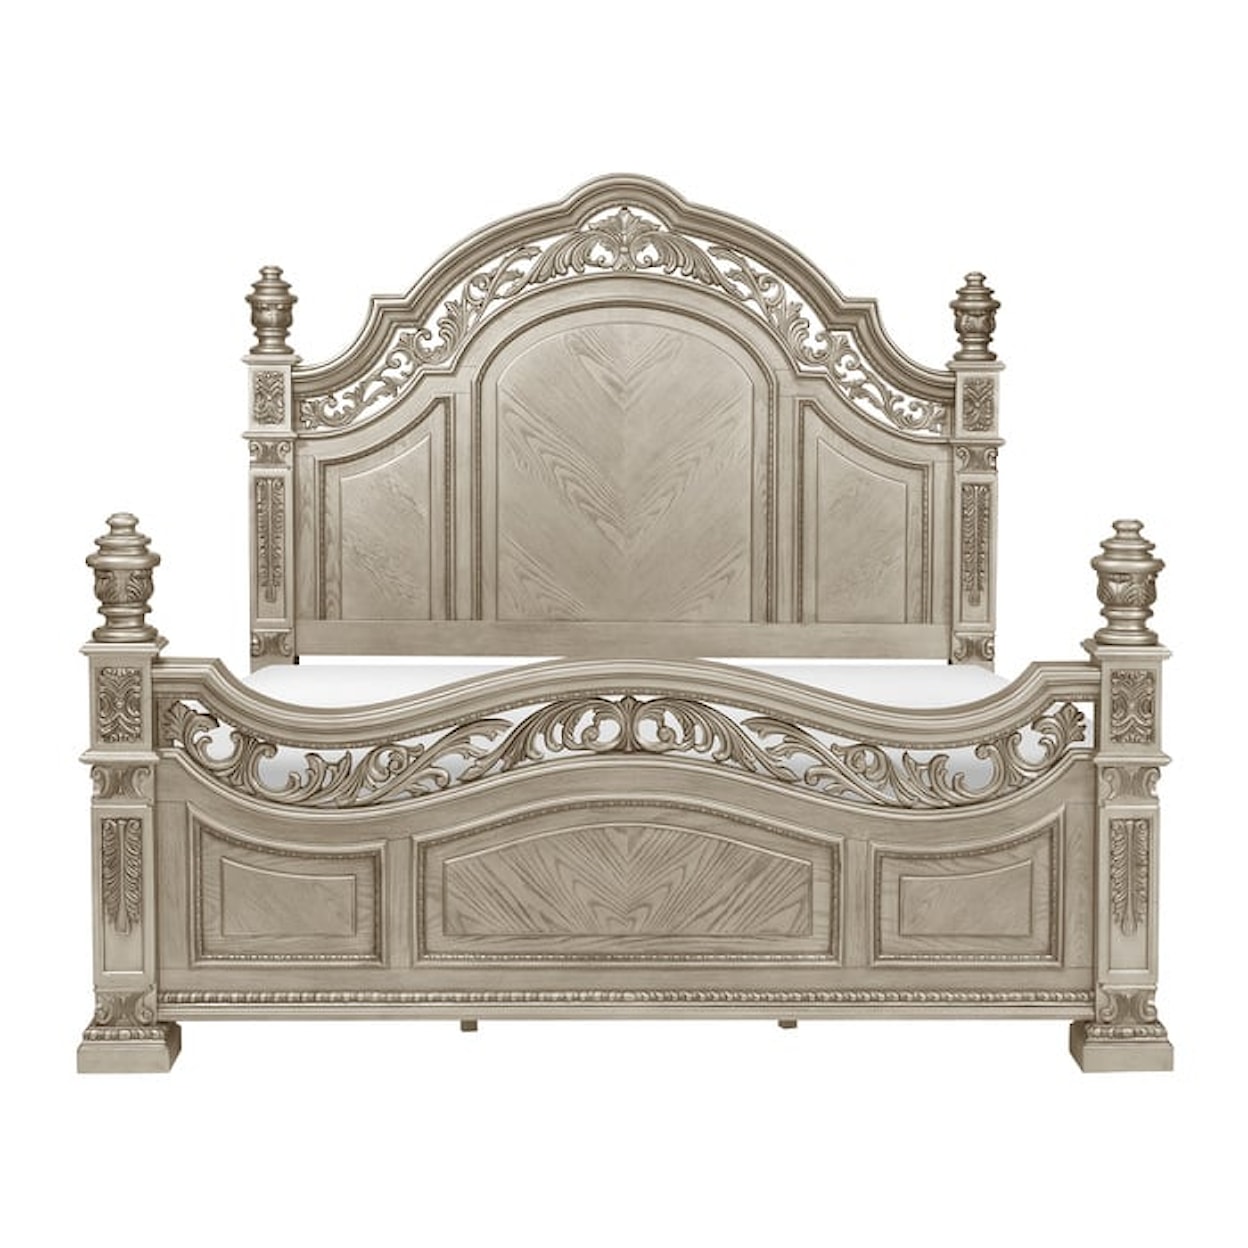 Homelegance Furniture Catalonia Queen Bed